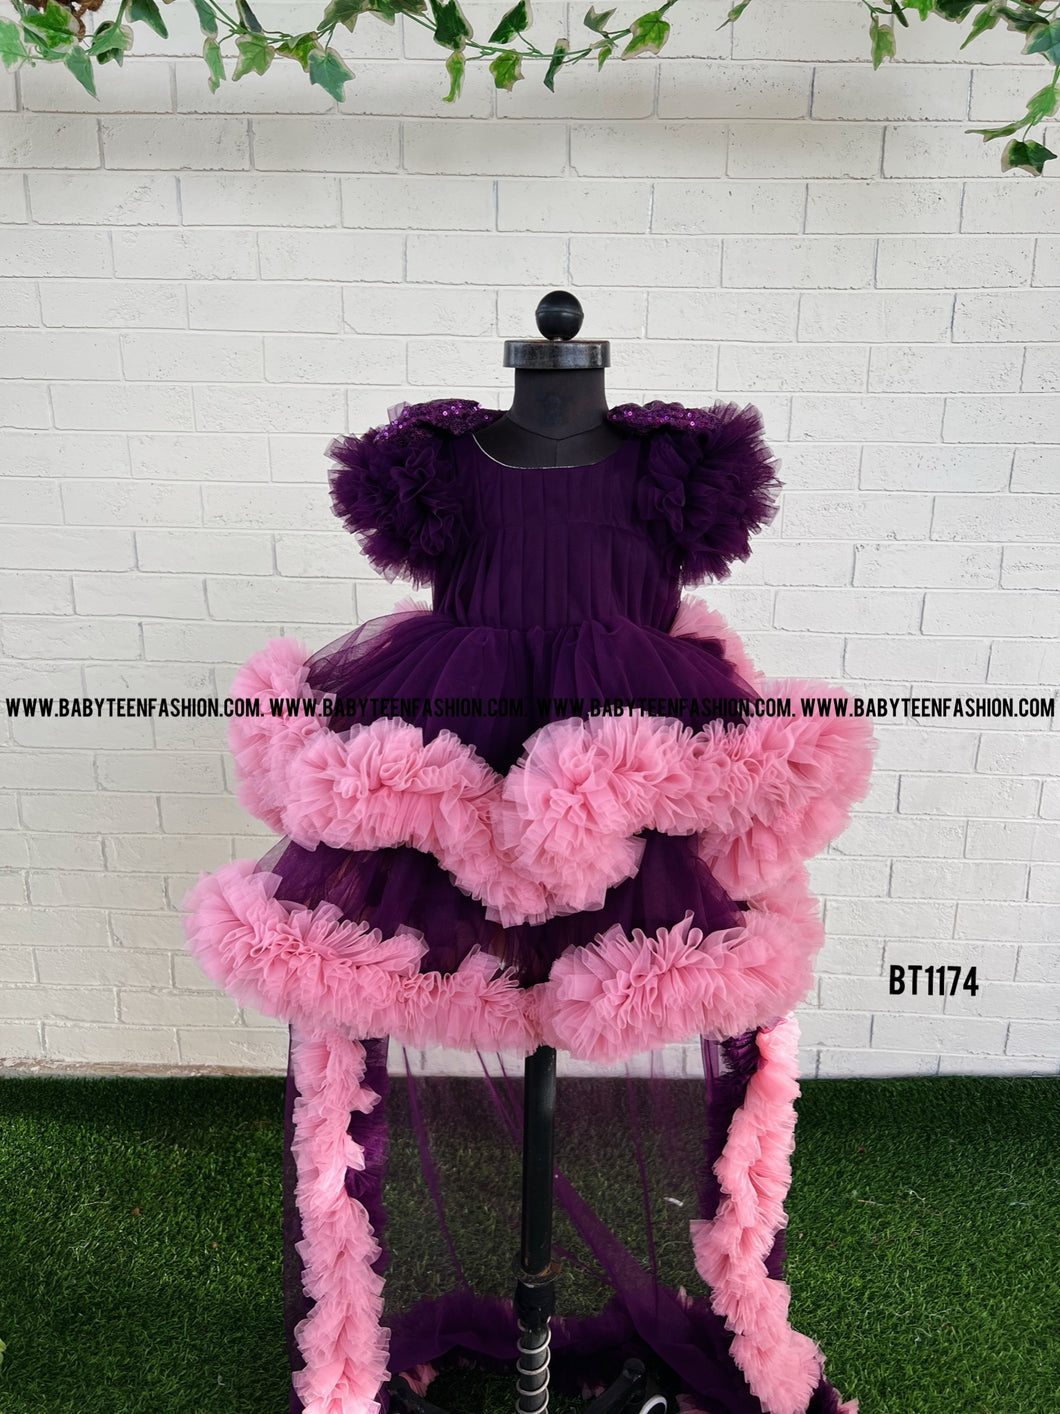 BT1174 Heavy Ruffles Frock For Birthday party